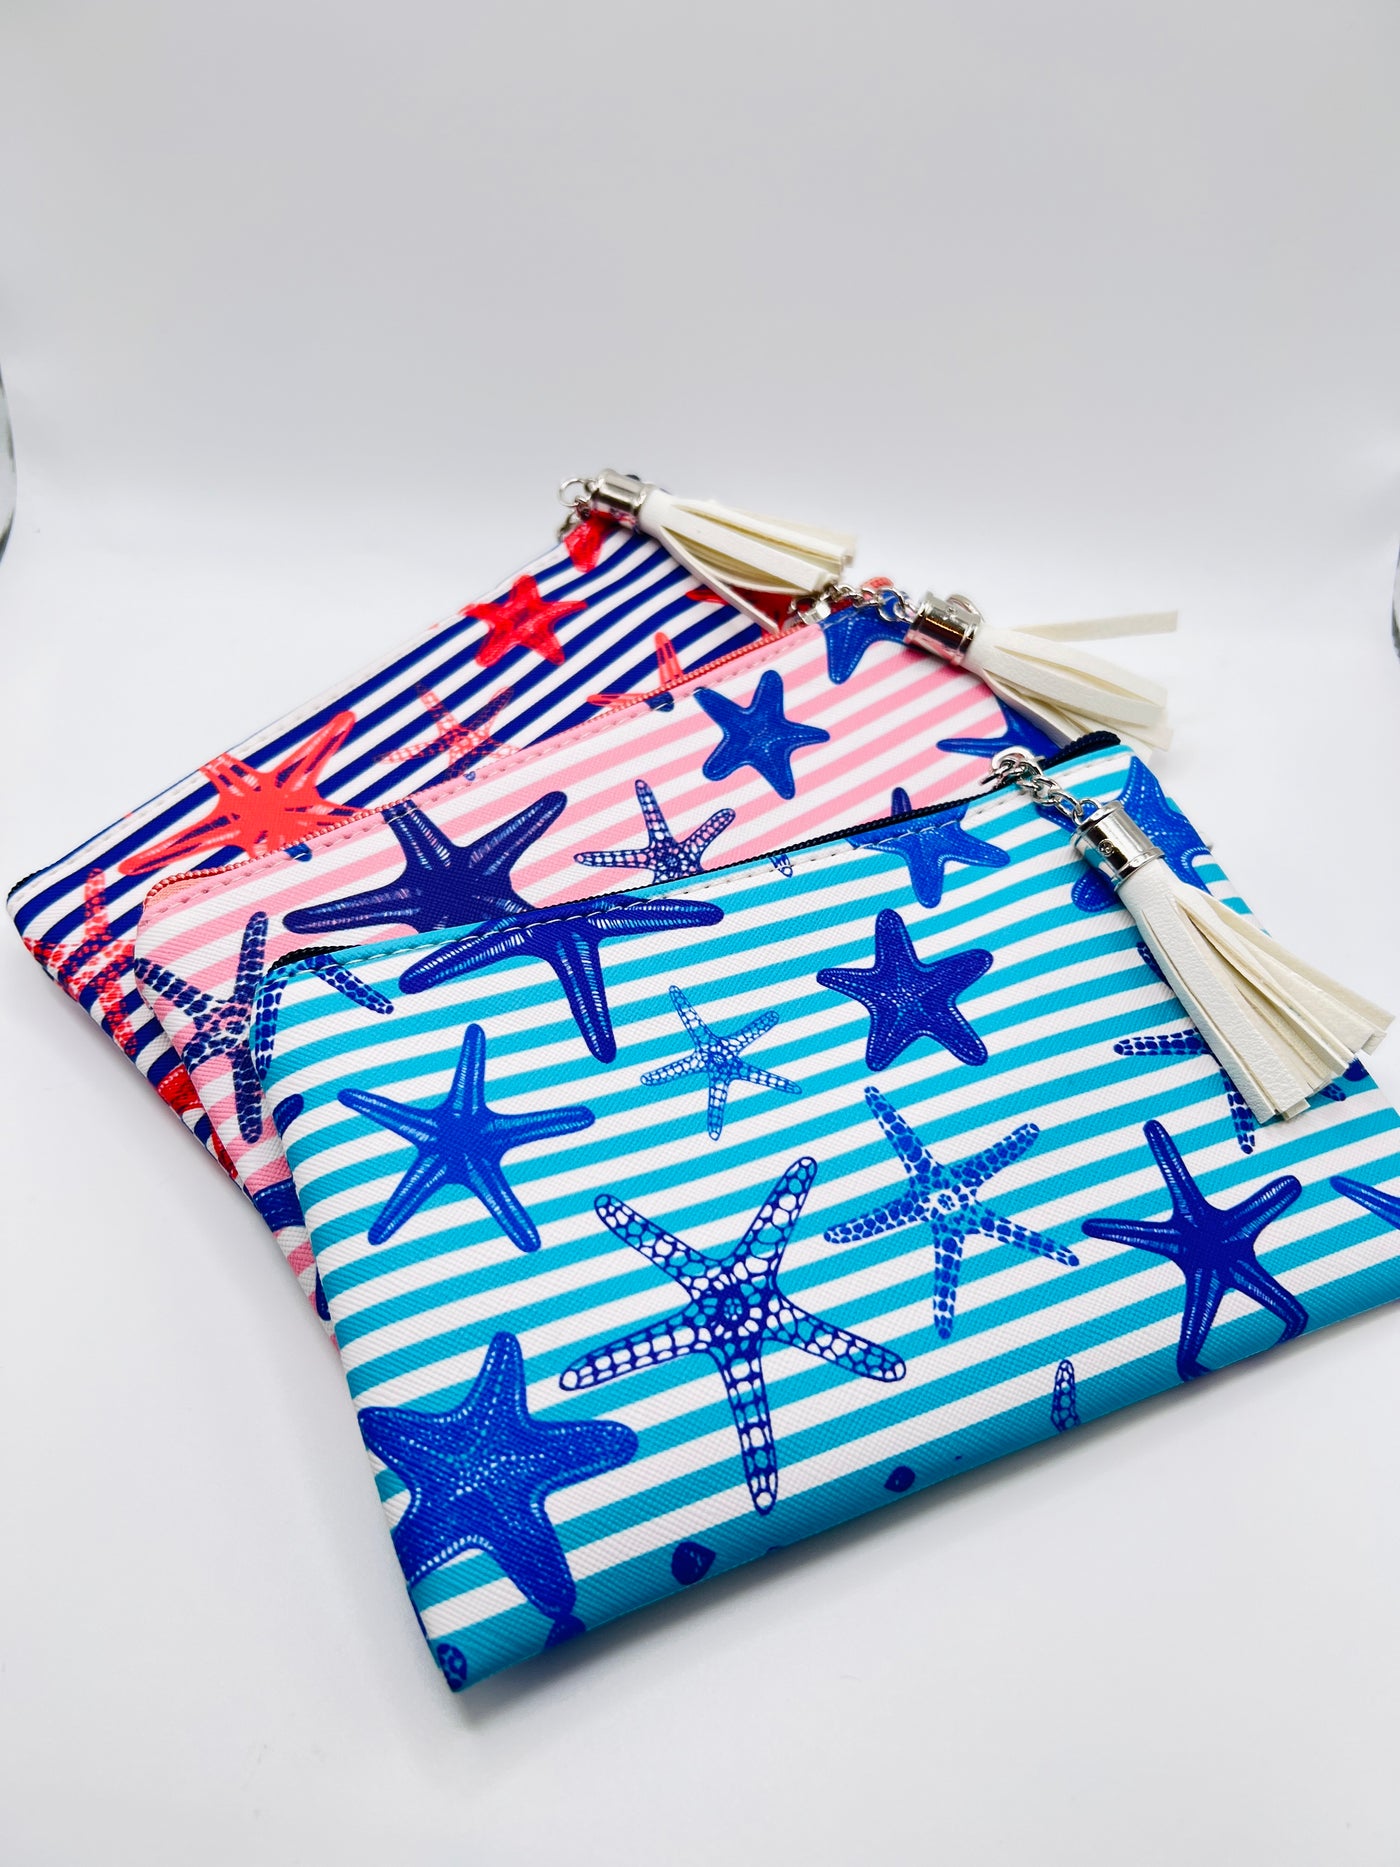 Totes & Wristlets by Periwinkle